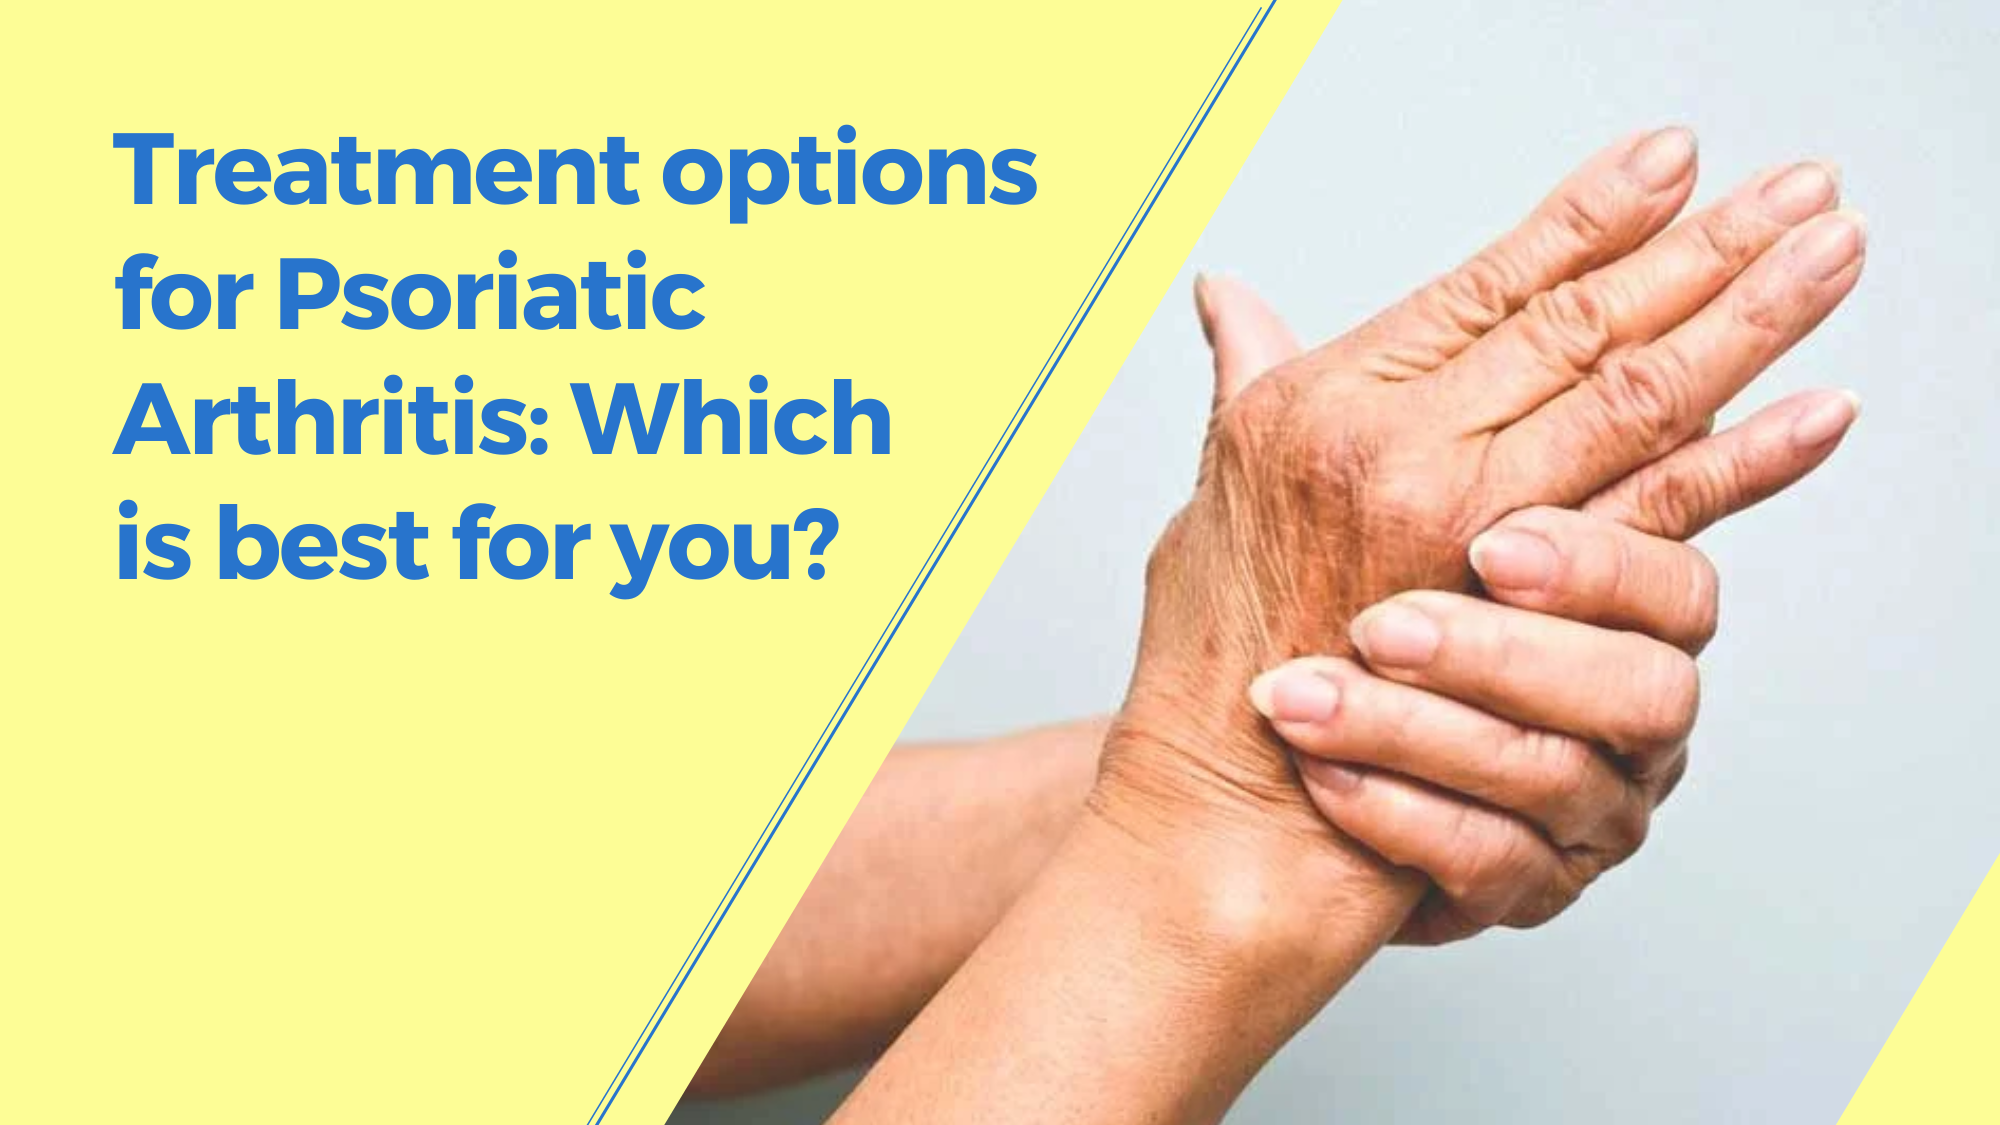 Treatment options for psoriatic arthritis: which is best for you?